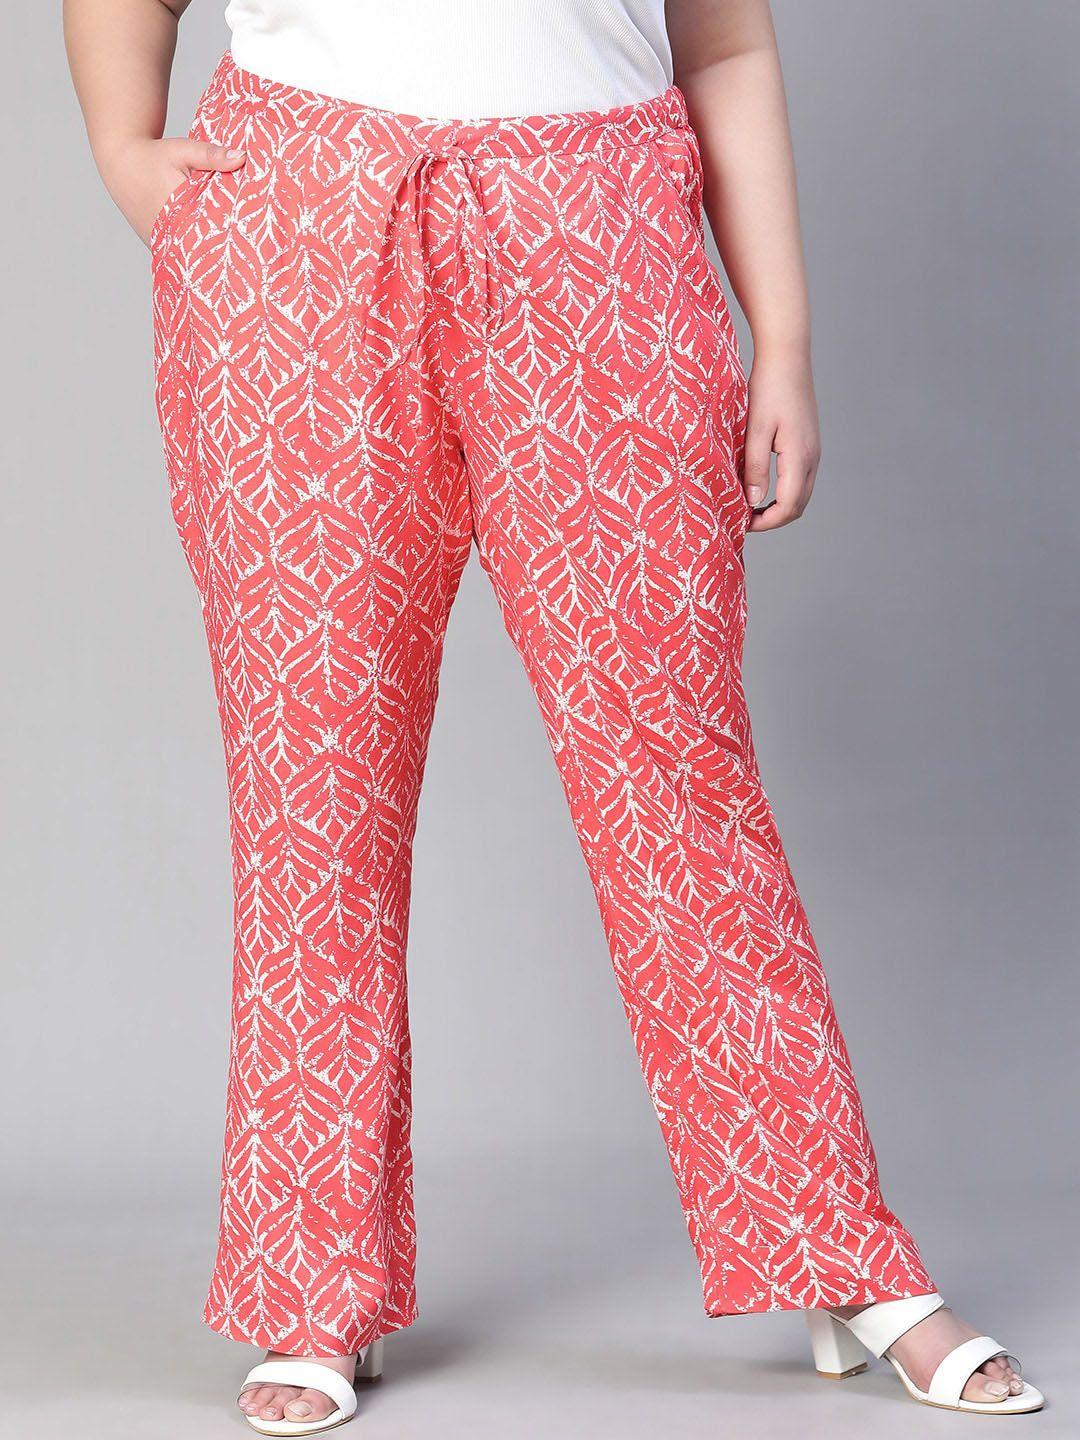 oxolloxo-women-plus-size-floral-printed-relaxed-straight-fit-easy-wash-trousers